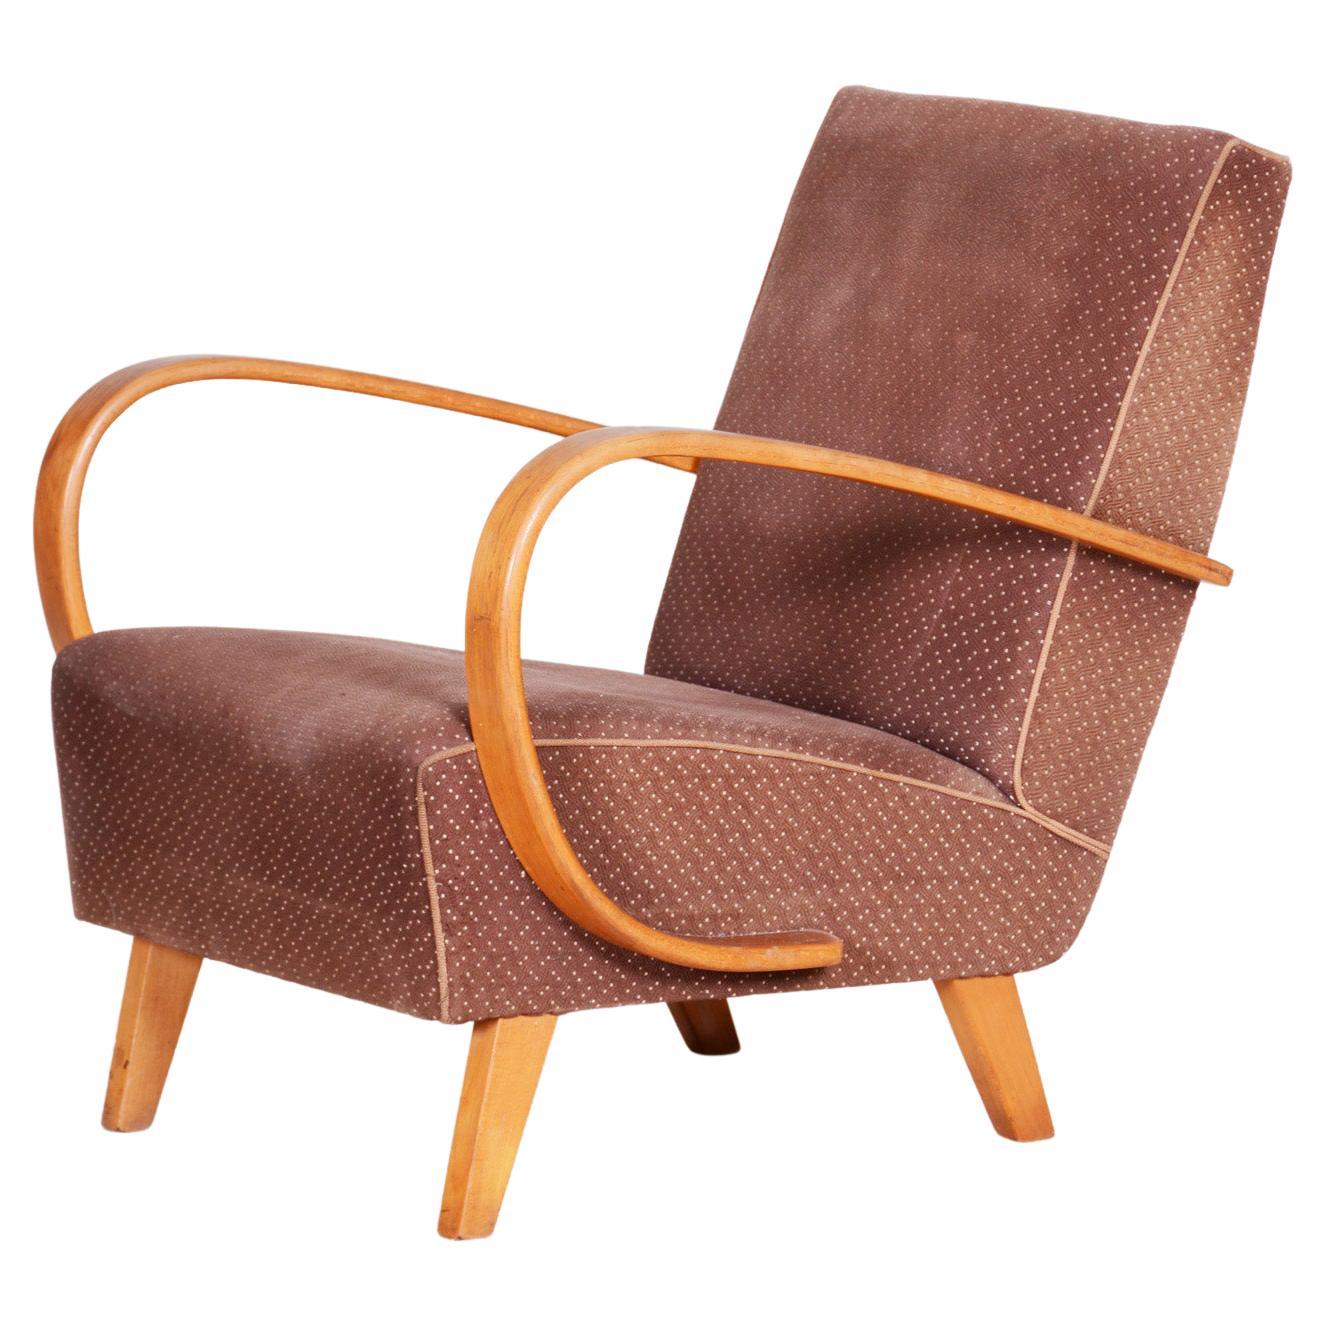 Brown Armchair, Made in Czechia, 1930s, Original Condition, Art Deco Style For Sale